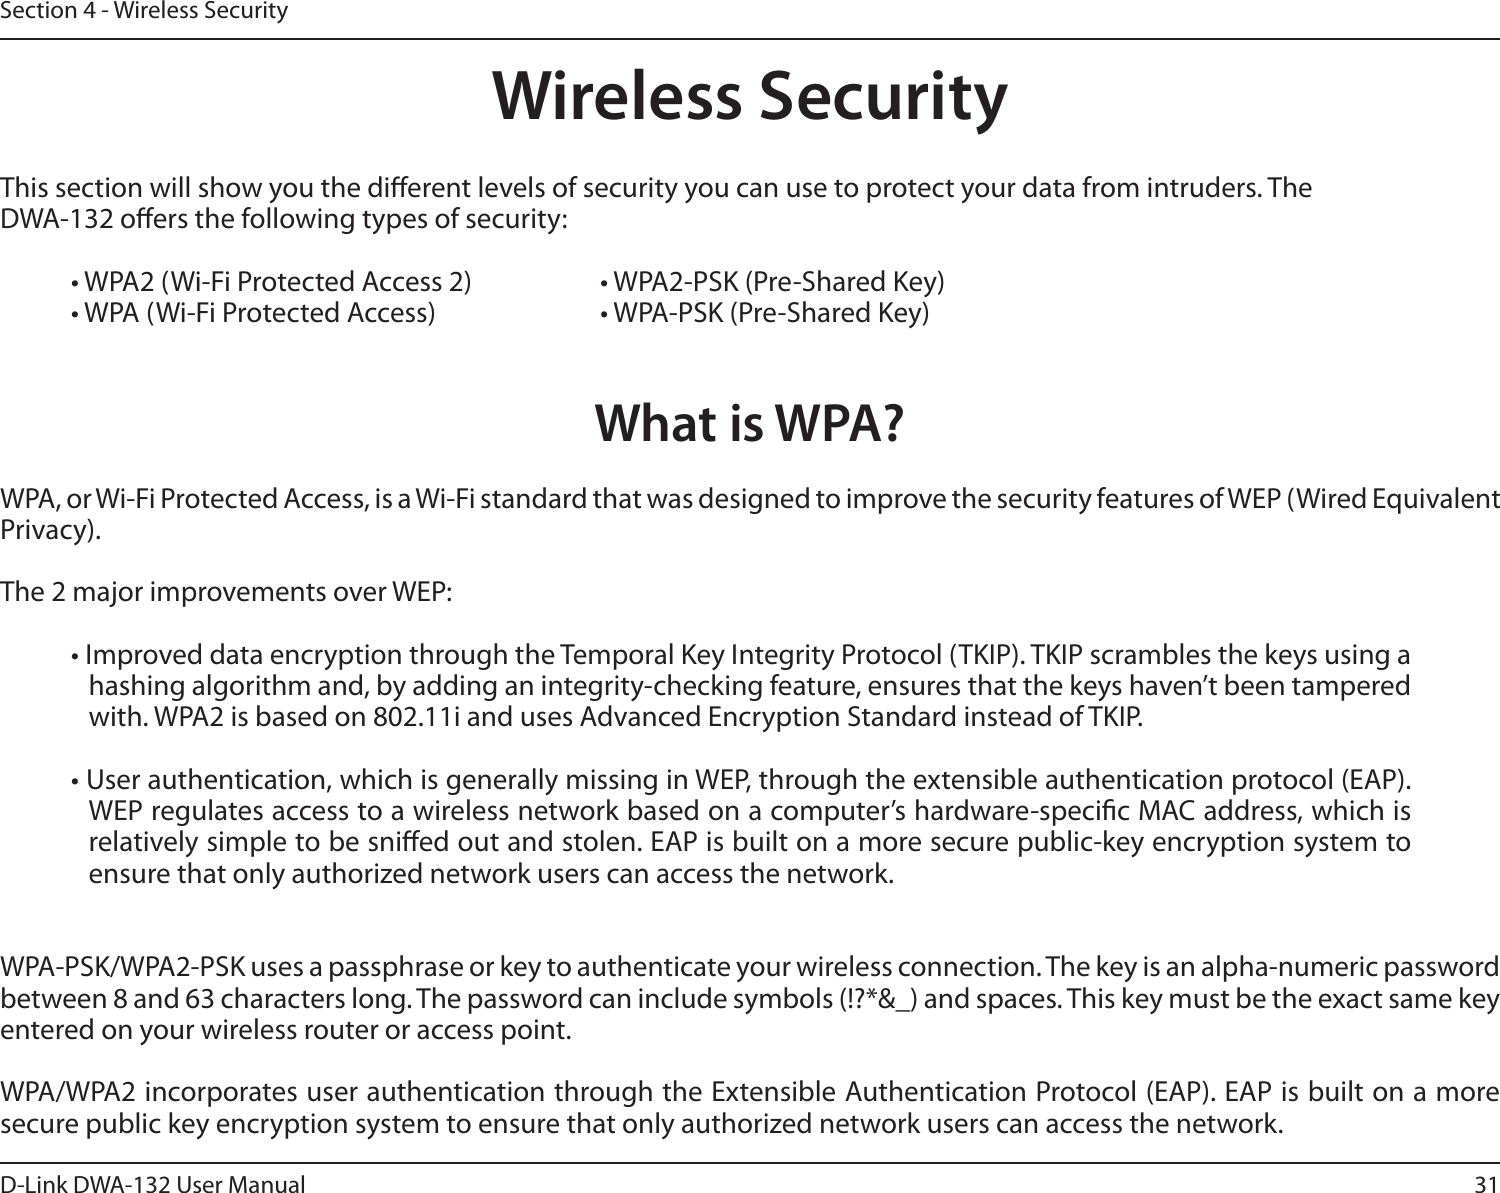 31D-Link DWA-132 User ManualSection 4 - Wireless SecurityWireless SecurityThis section will show you the dierent levels of security you can use to protect your data from intruders. The DWA-132 oers the following types of security:• WPA2 (Wi-Fi Protected Access 2)     • WPA2-PSK (Pre-Shared Key)• WPA (Wi-Fi Protected Access)      • WPA-PSK (Pre-Shared Key)What is WPA?WPA, or Wi-Fi Protected Access, is a Wi-Fi standard that was designed to improve the security features of WEP (Wired Equivalent Privacy).  The 2 major improvements over WEP: • Improved data encryption through the Temporal Key Integrity Protocol (TKIP). TKIP scrambles the keys using a hashing algorithm and, by adding an integrity-checking feature, ensures that the keys haven’t been tampered with. WPA2 is based on 802.11i and uses Advanced Encryption Standard instead of TKIP.• User authentication, which is generally missing in WEP, through the extensible authentication protocol (EAP). WEP regulates access to a wireless network based on a computer’s hardware-specic MAC address, which is relatively simple to be snied out and stolen. EAP is built on a more secure public-key encryption system to ensure that only authorized network users can access the network.WPA-PSK/WPA2-PSK uses a passphrase or key to authenticate your wireless connection. The key is an alpha-numeric password between 8 and 63 characters long. The password can include symbols (!?*&amp;_) and spaces. This key must be the exact same key entered on your wireless router or access point.WPA/WPA2 incorporates user authentication through the Extensible Authentication Protocol (EAP). EAP is built on a more secure public key encryption system to ensure that only authorized network users can access the network.